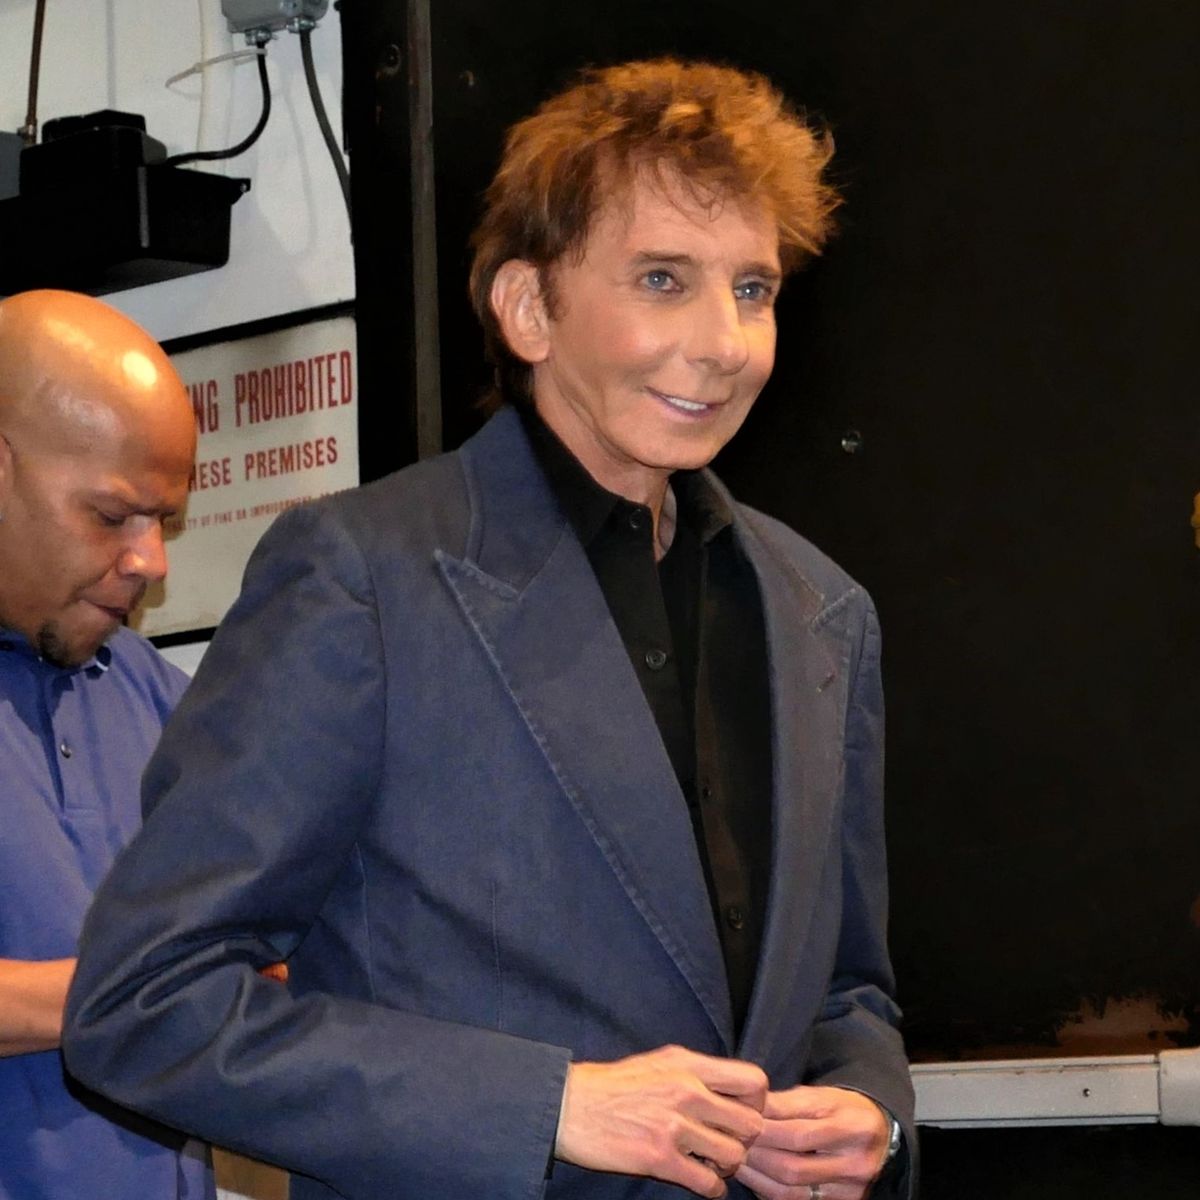 Why is Barry Manilow famous? How many top 10 hits did Barry Manilow